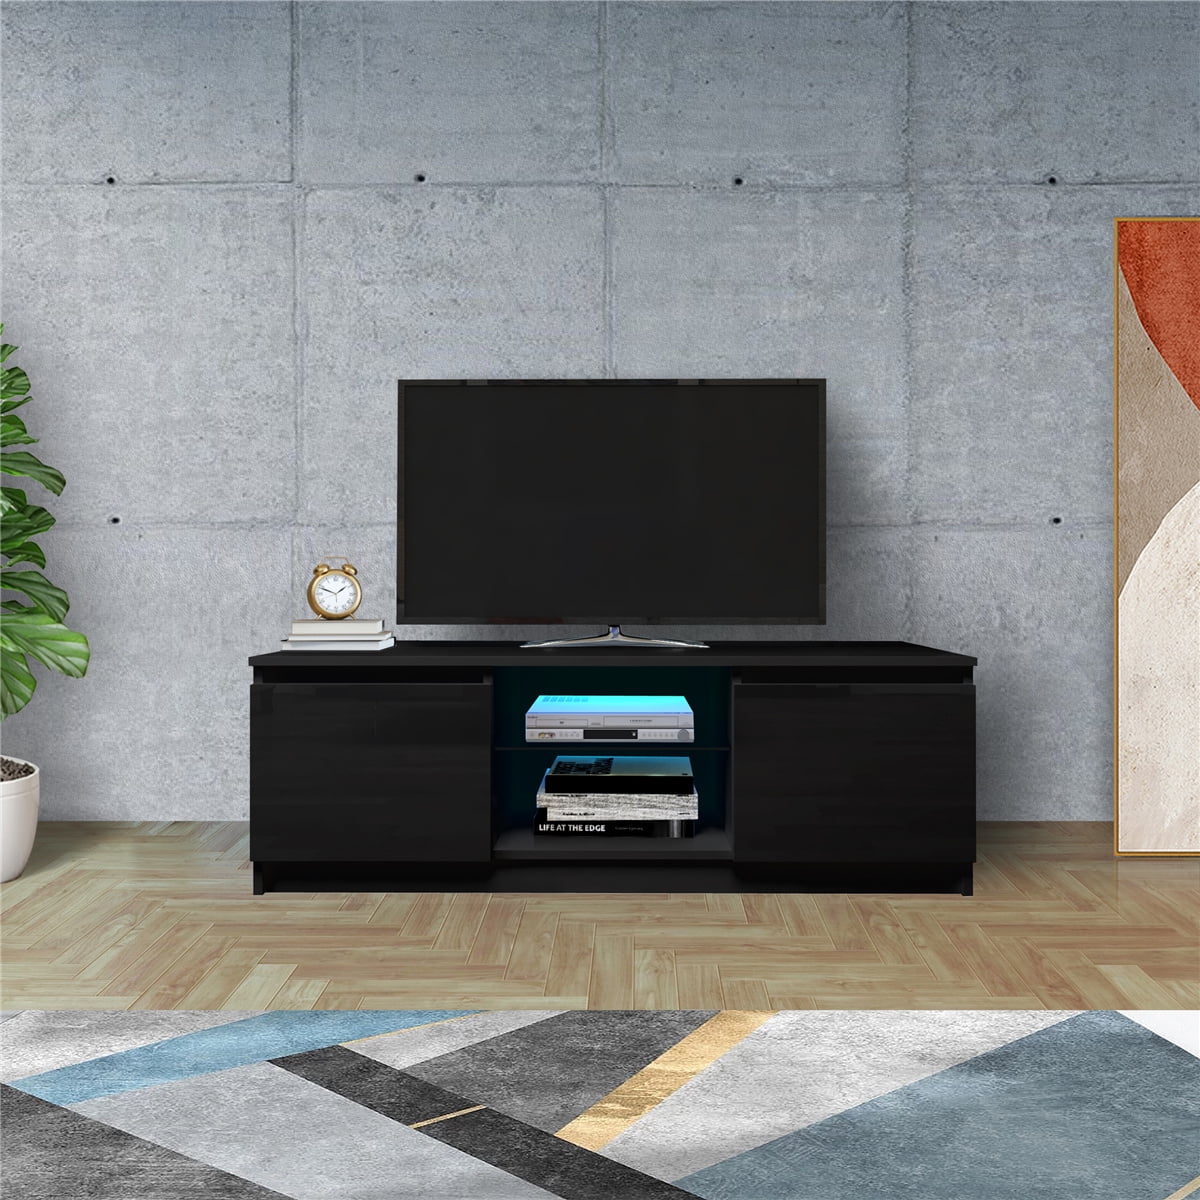 Details about   LED TV Cabinet Stand Storage Drawers Entertainment Center Media Console Table 